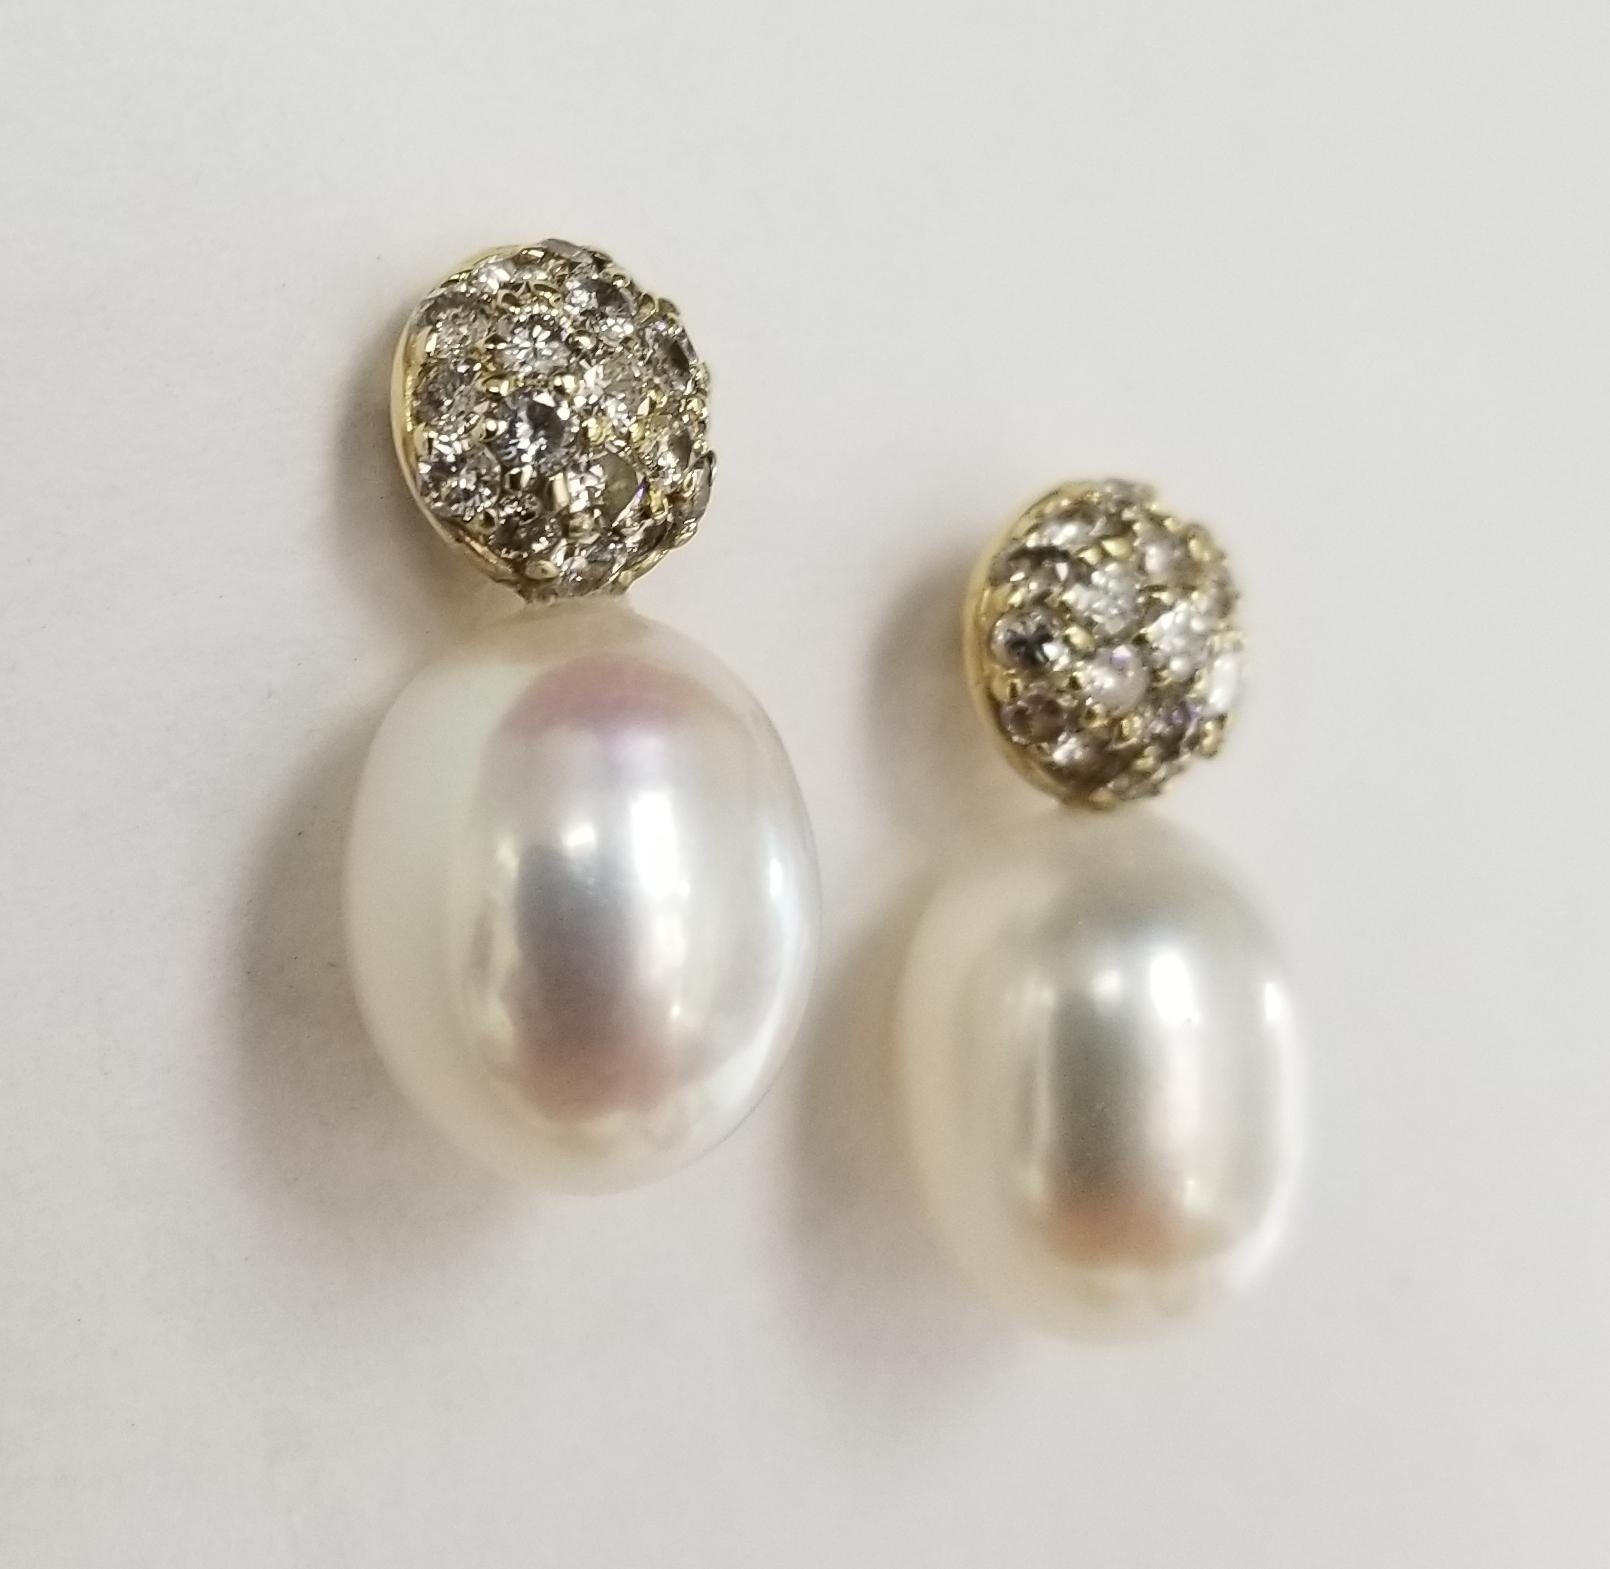 14k yellow gold large pearl and diamond drop earrings, containing 2 fresh water pearls 10mm x 12mm with round full cut pave set 38 diamonds weighing 1.06pt.s